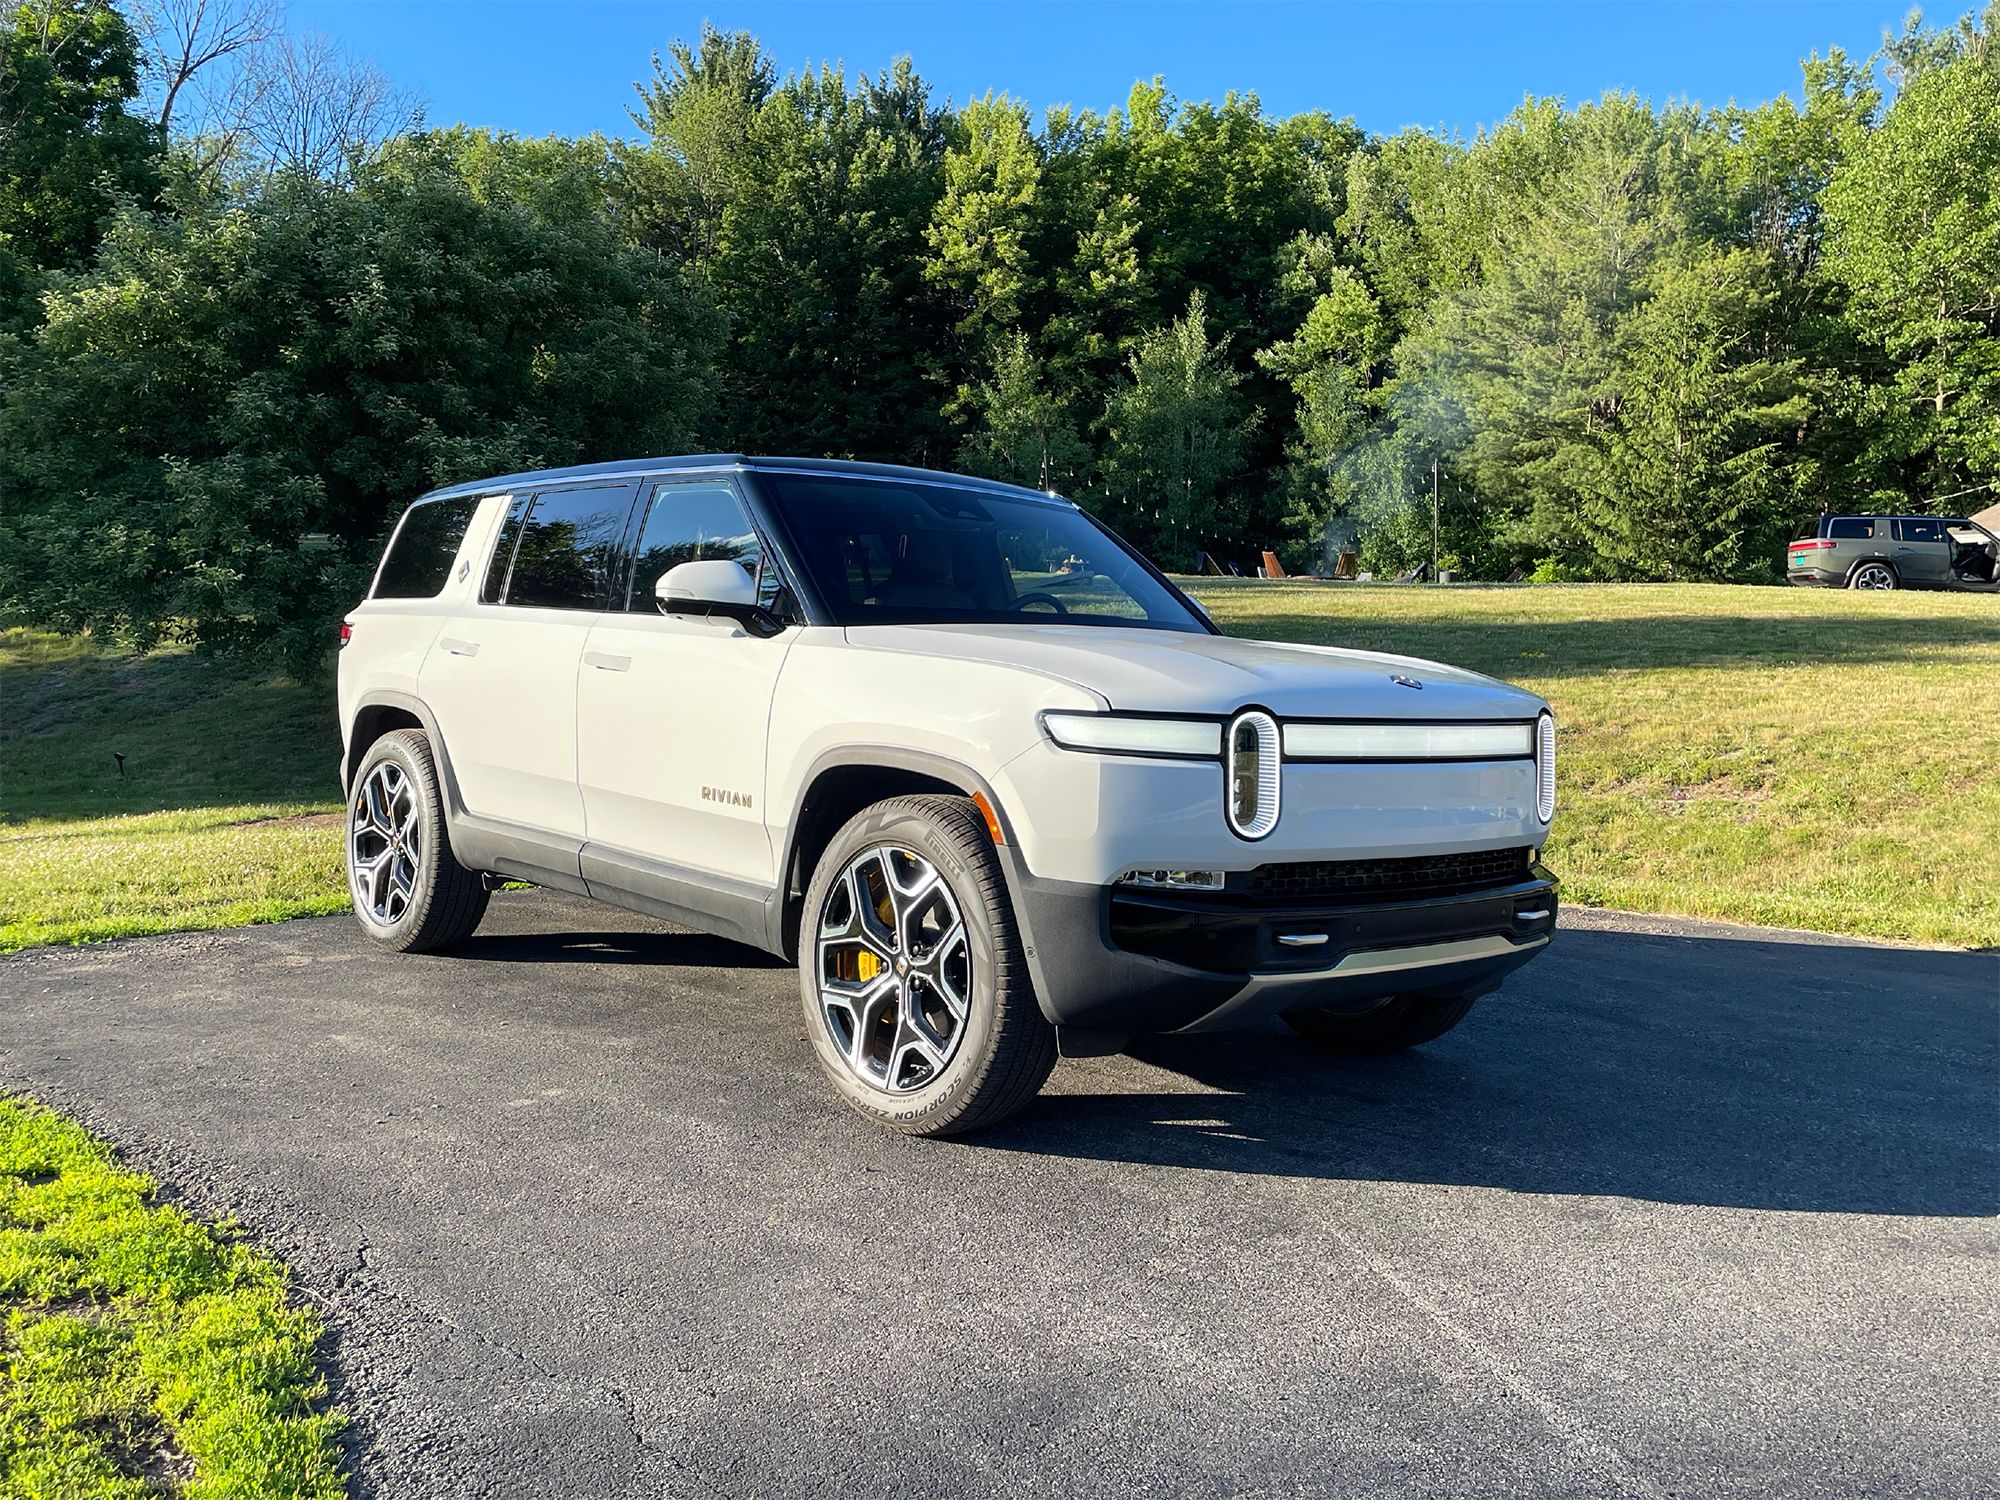 Stay Ahead with Rivian: Innovative Electric Vehicles for the Future